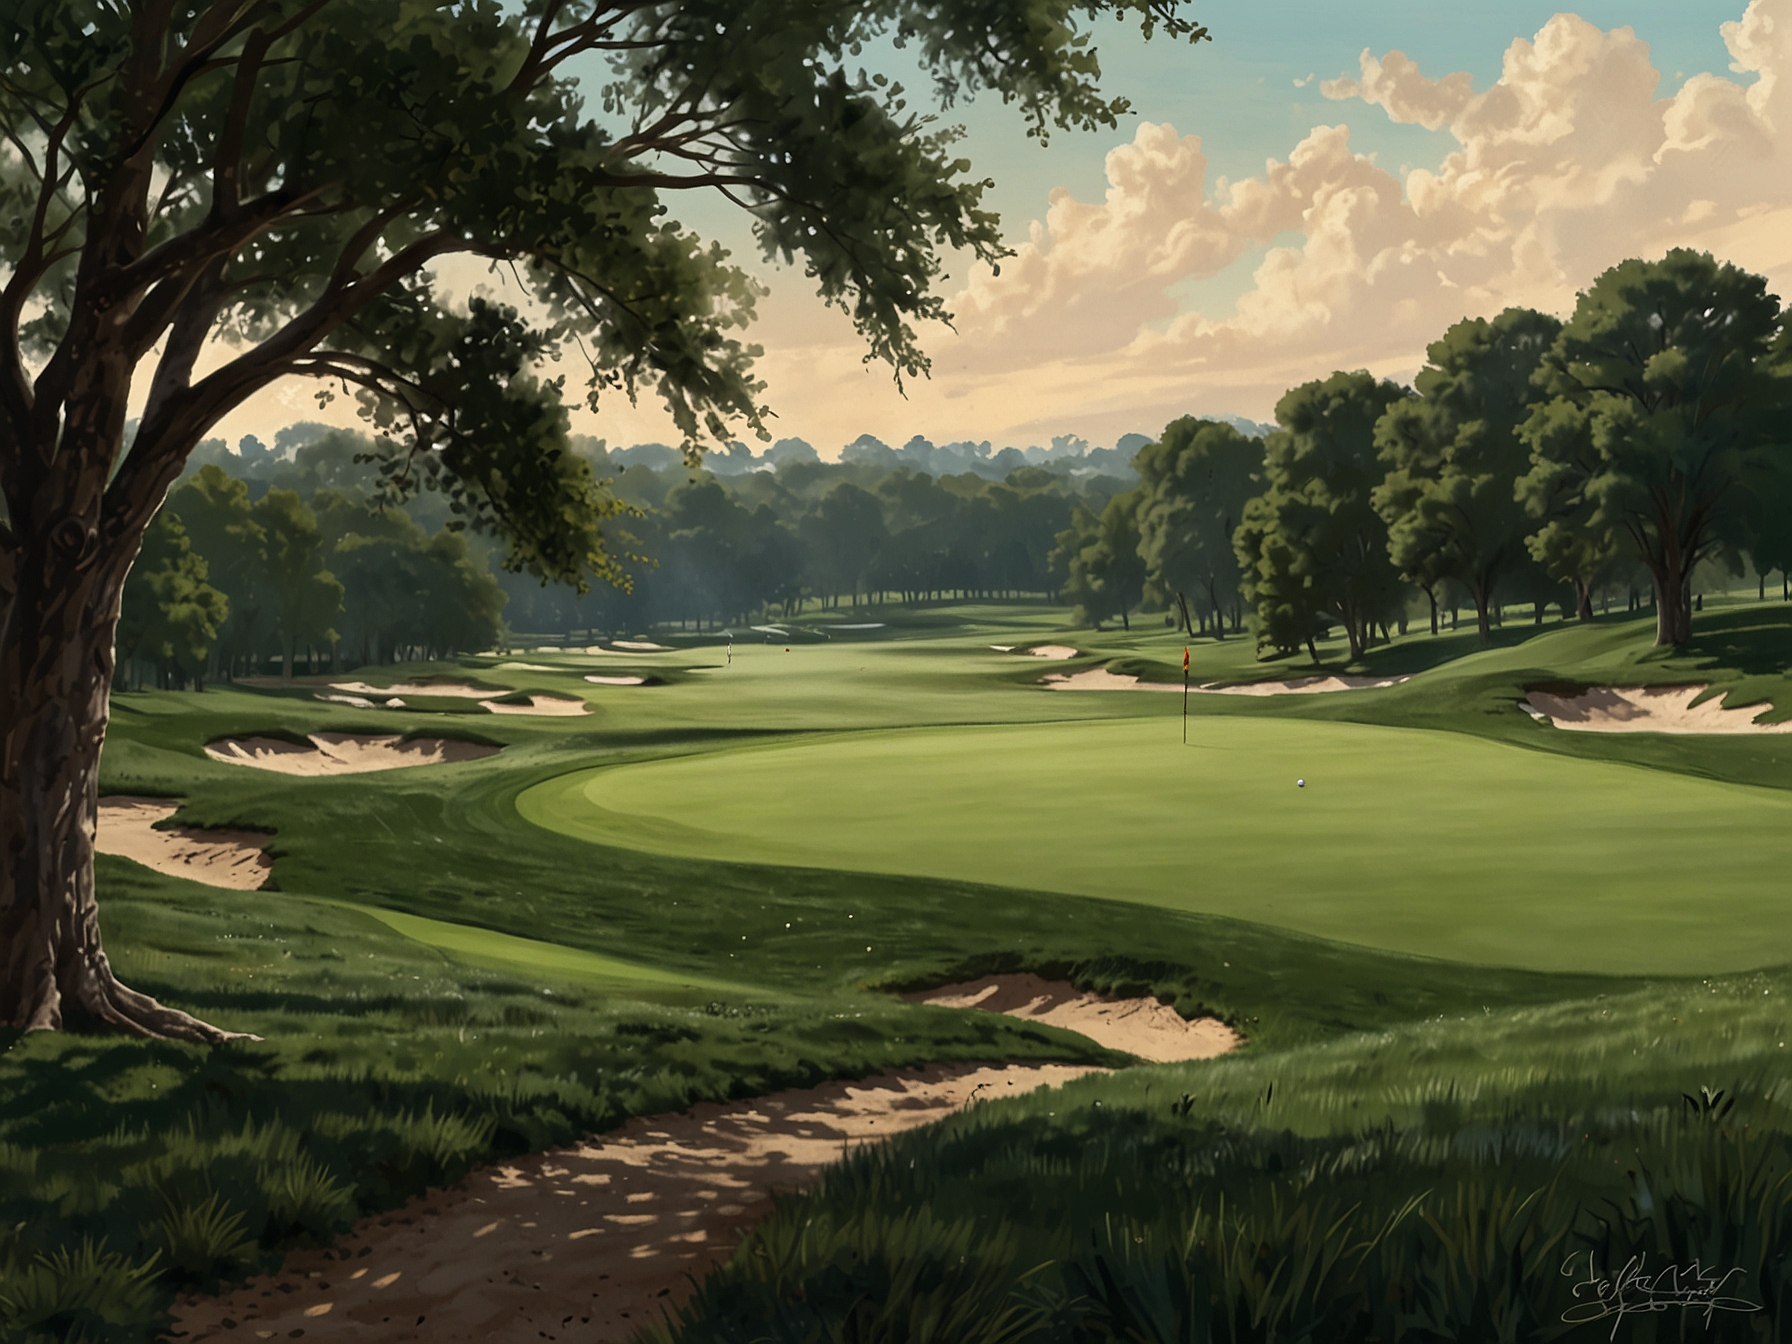 A picturesque view of the challenging fairways and lush greens of the KPMG Women’s PGA Championship course, where Schmelzel's strategic navigation and skillful play have made her a frontrunner.